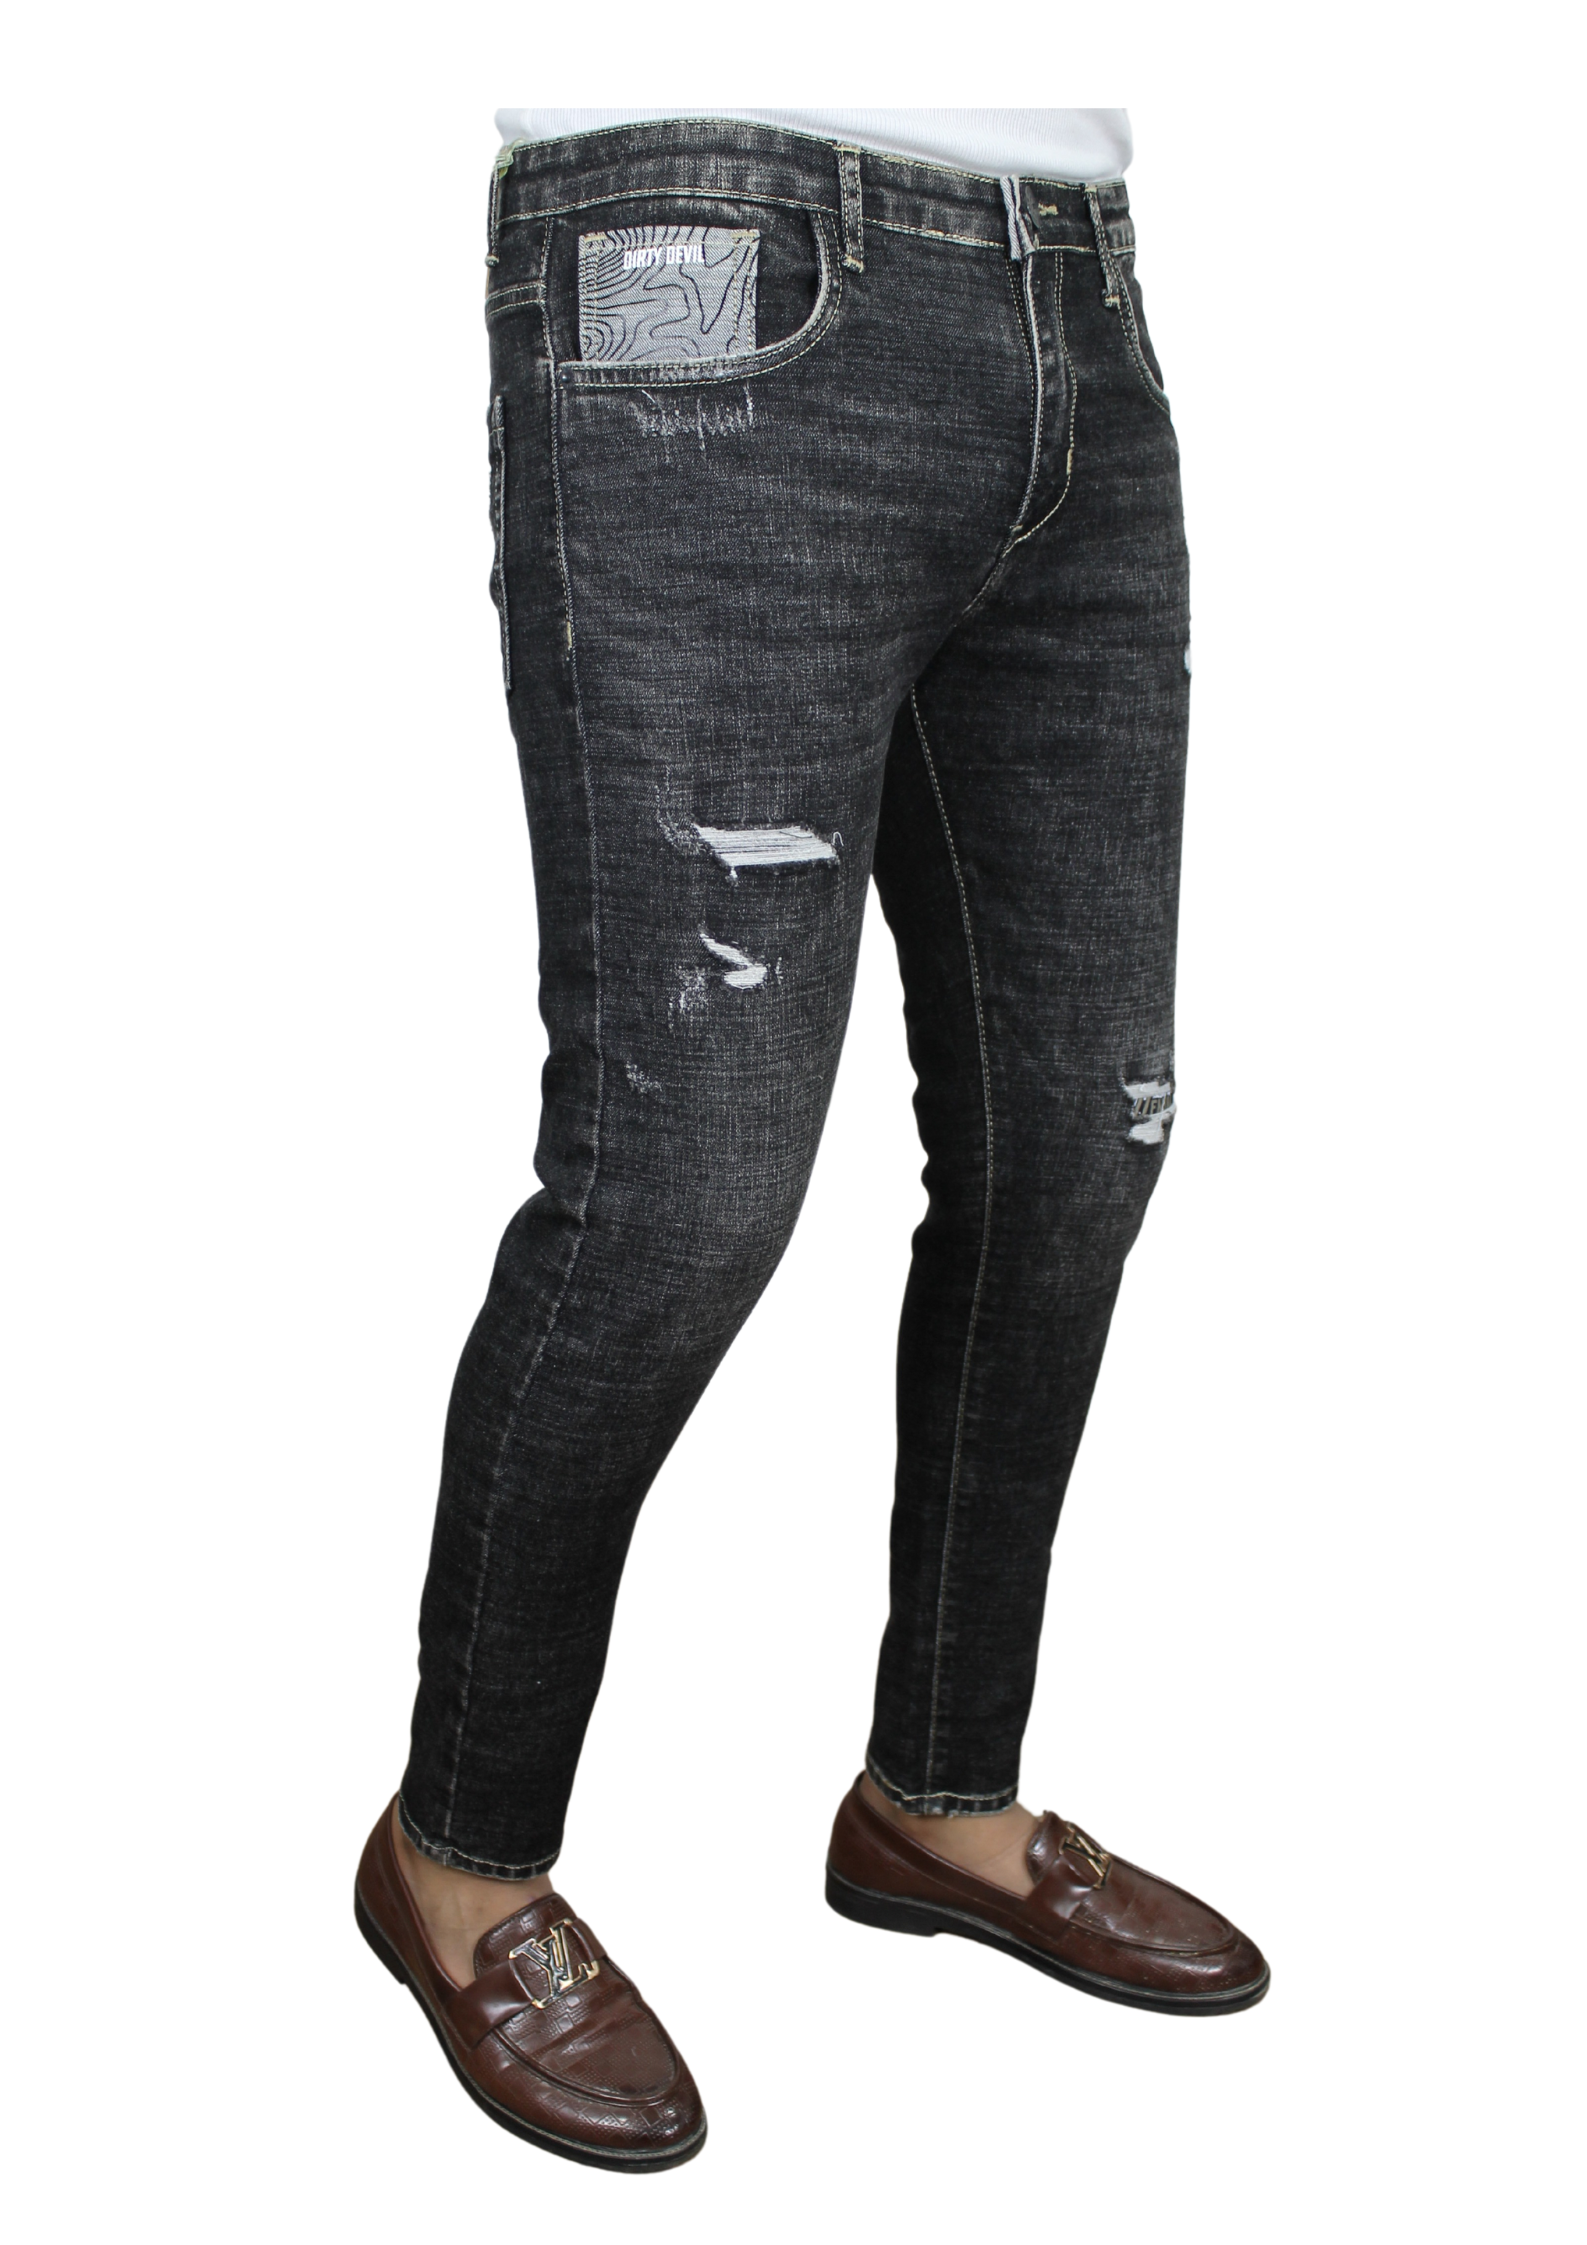 Smooth Charcoel Gray Dark Ankle Fit Funky Denim Jeans